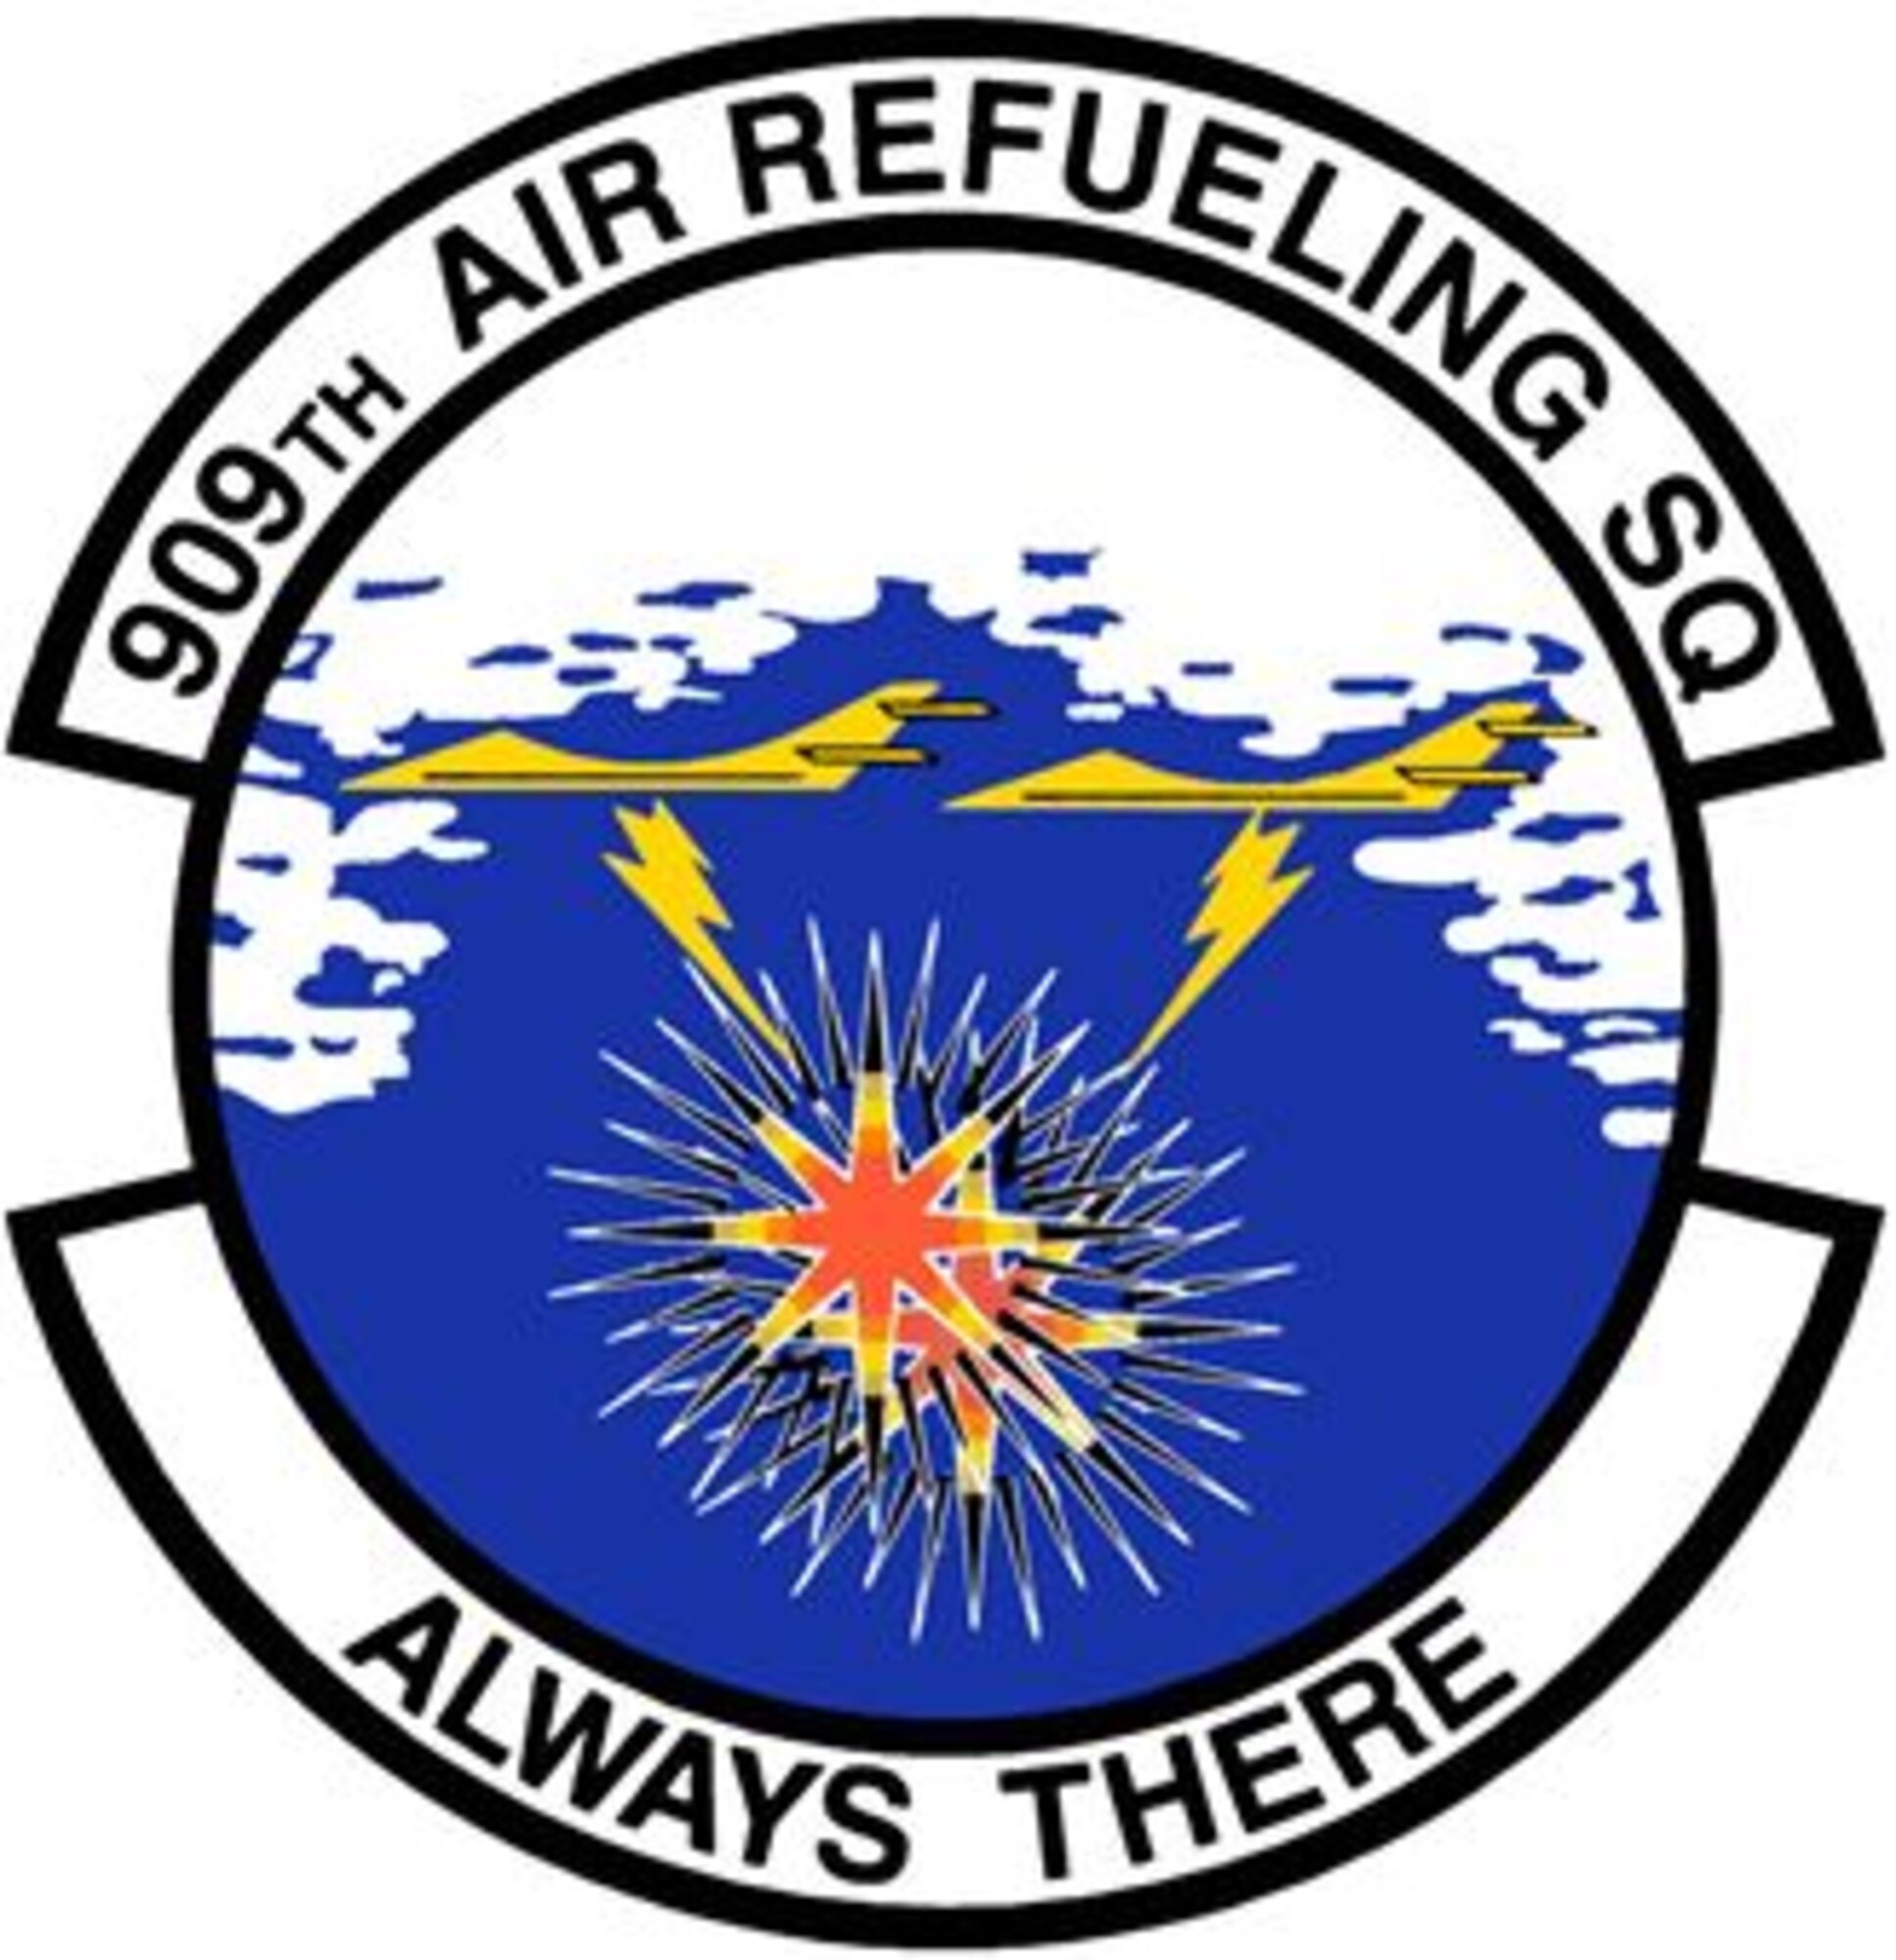 In accordance with Chapter 3 of AFI 84-105, commercial reproduction of this emblem is NOT permitted without the permission of the proponent organizational/unit commander.